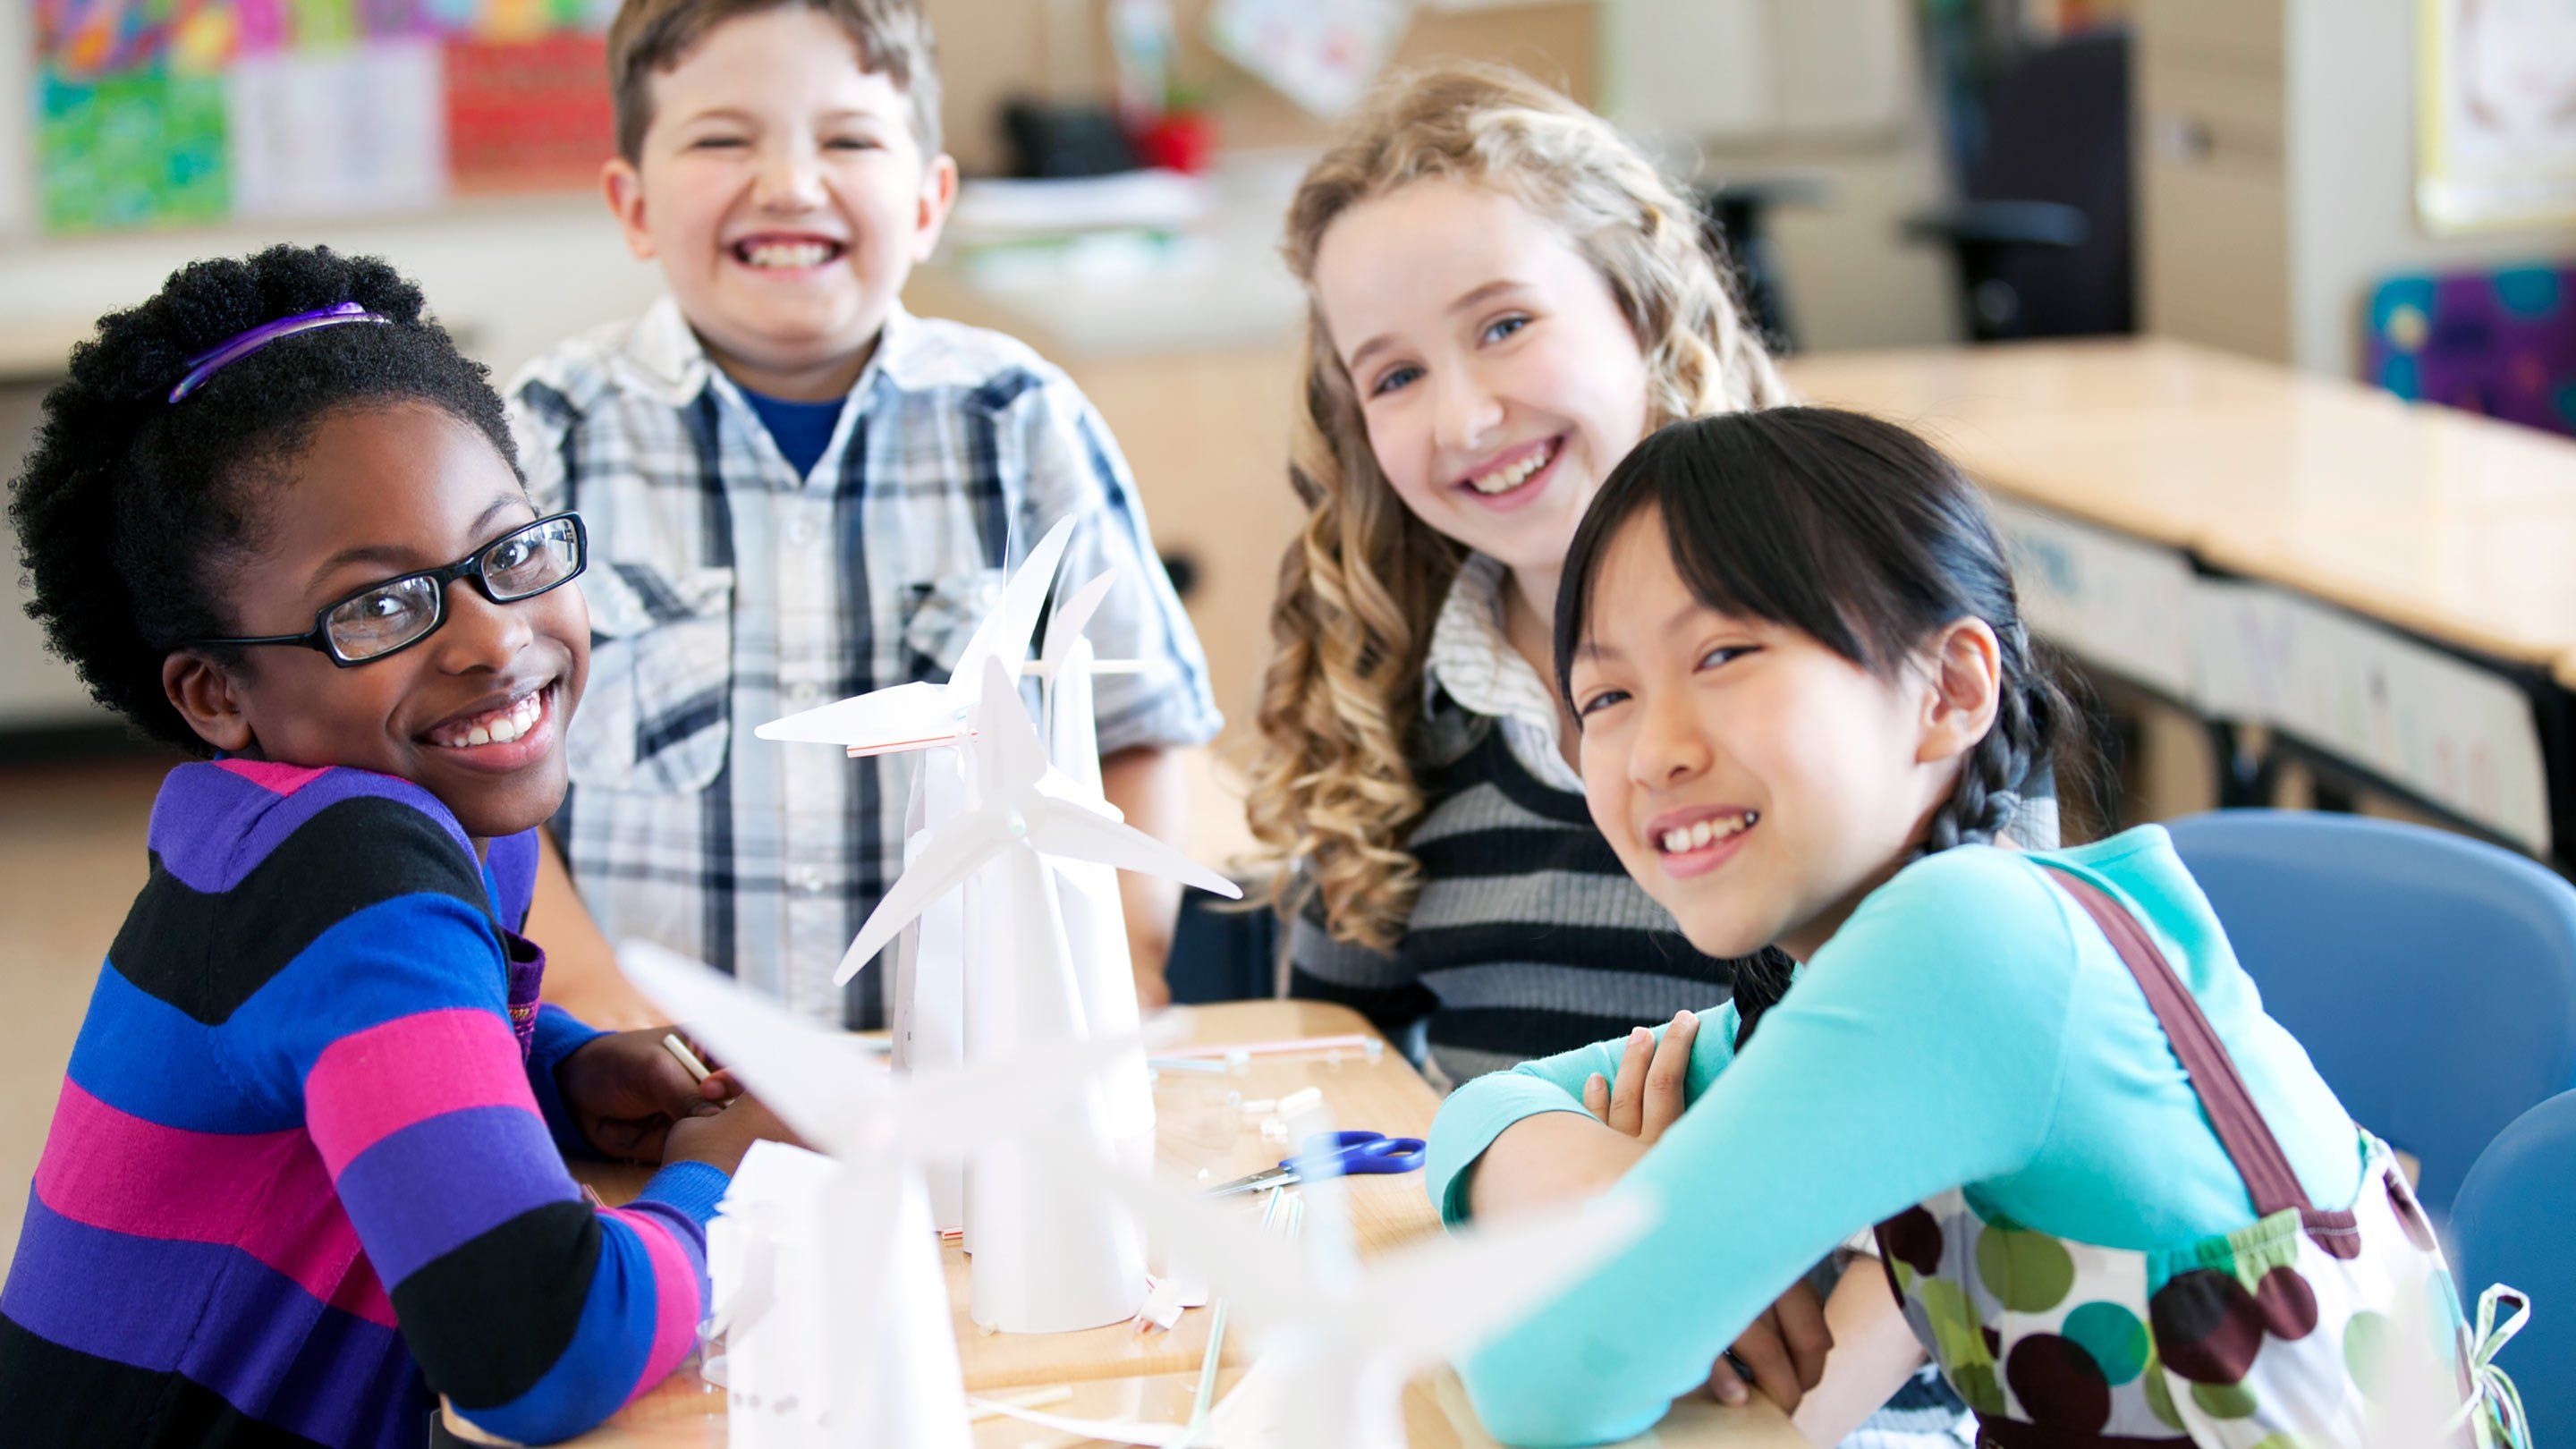 4 Approaches to Building Positive Community in Any Classroom